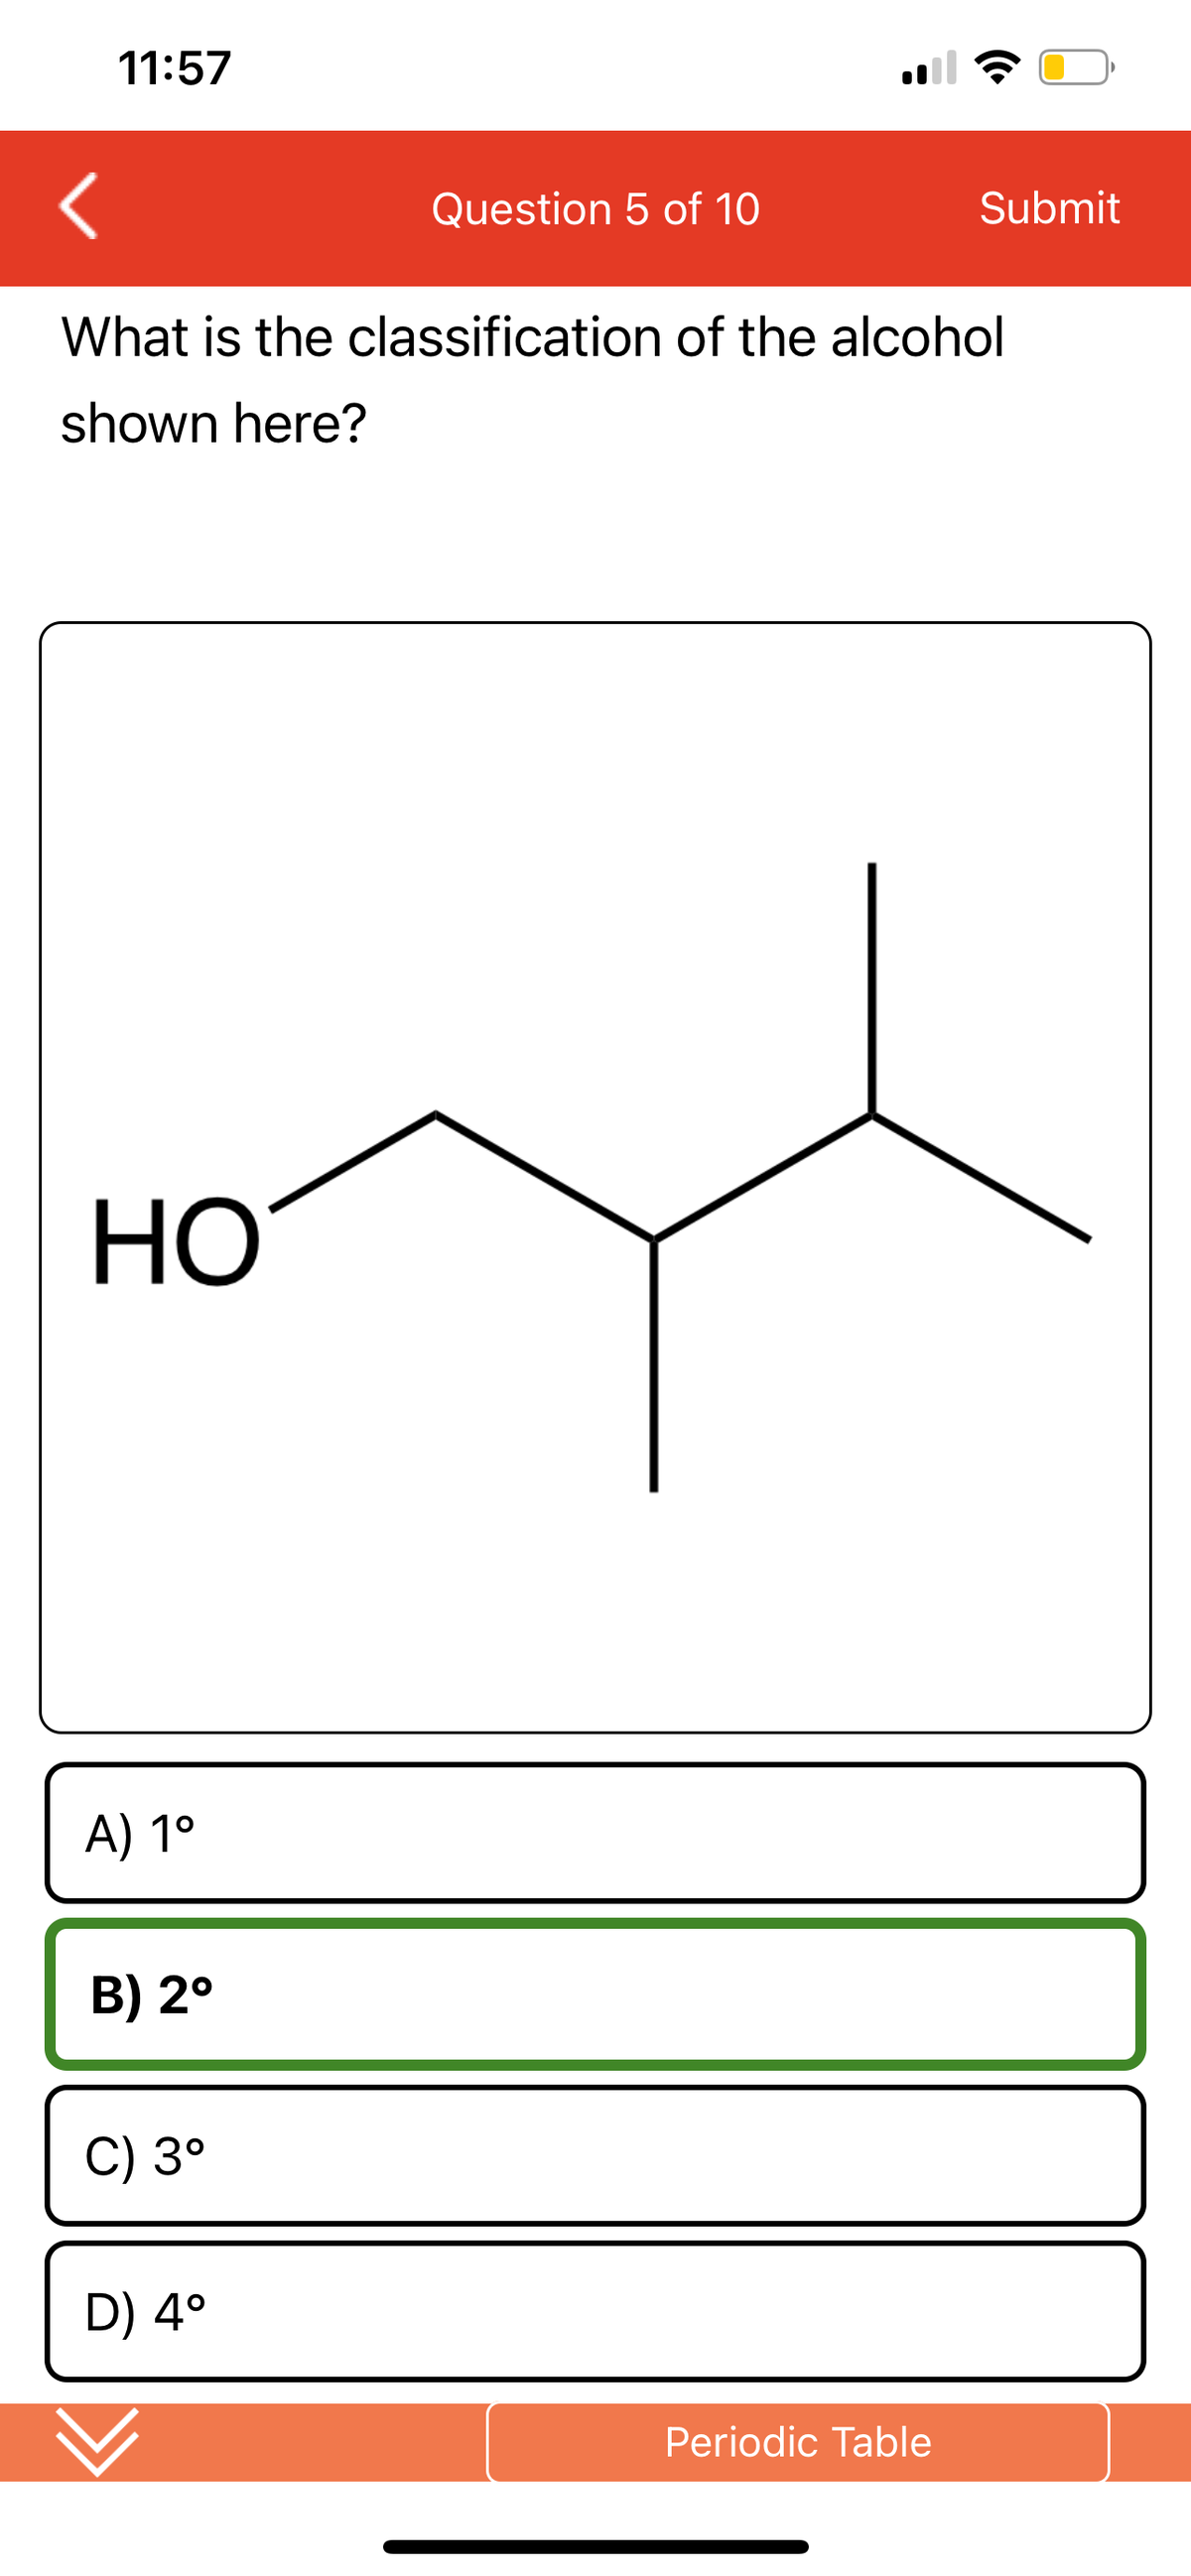 11:57
<
What is the classification of the alcohol
shown here?
HO
A) 1°
B) 2°
C) 3°
D) 4°
Question 5 of 10
Periodic Table
Submit